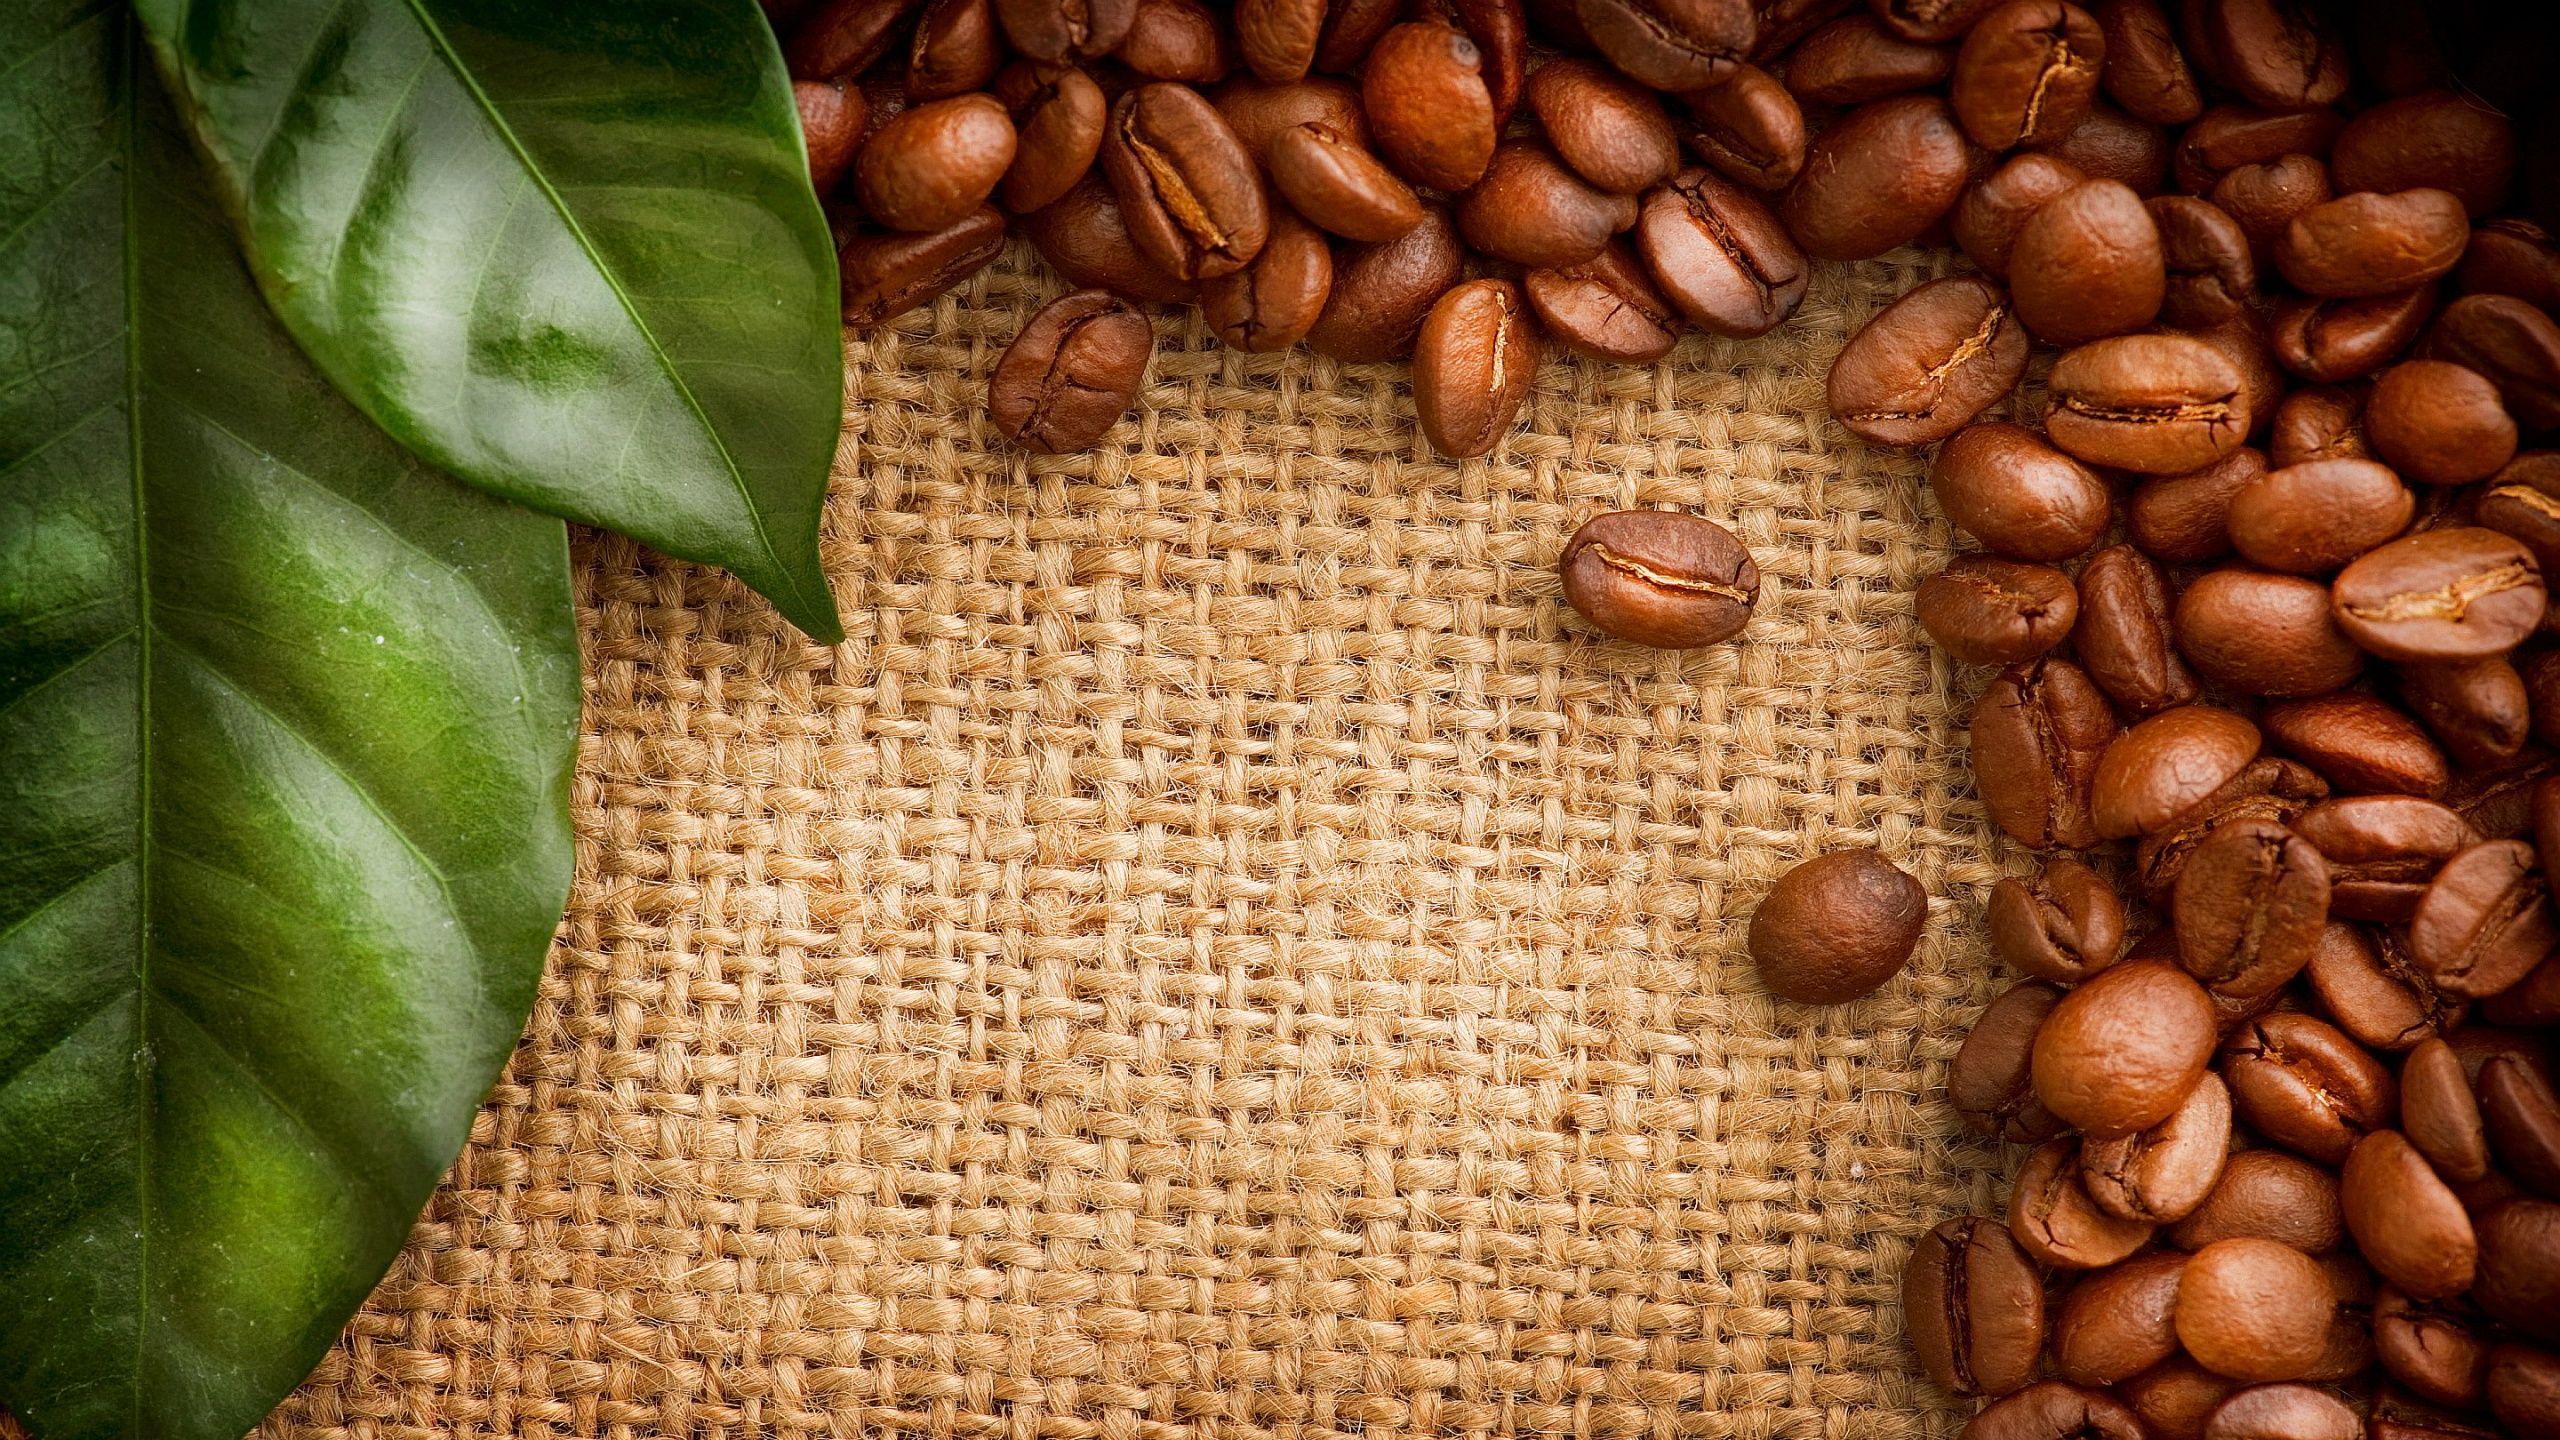 Coffee Beans HD Wallpaper. Beans image, Beans, Coffee image